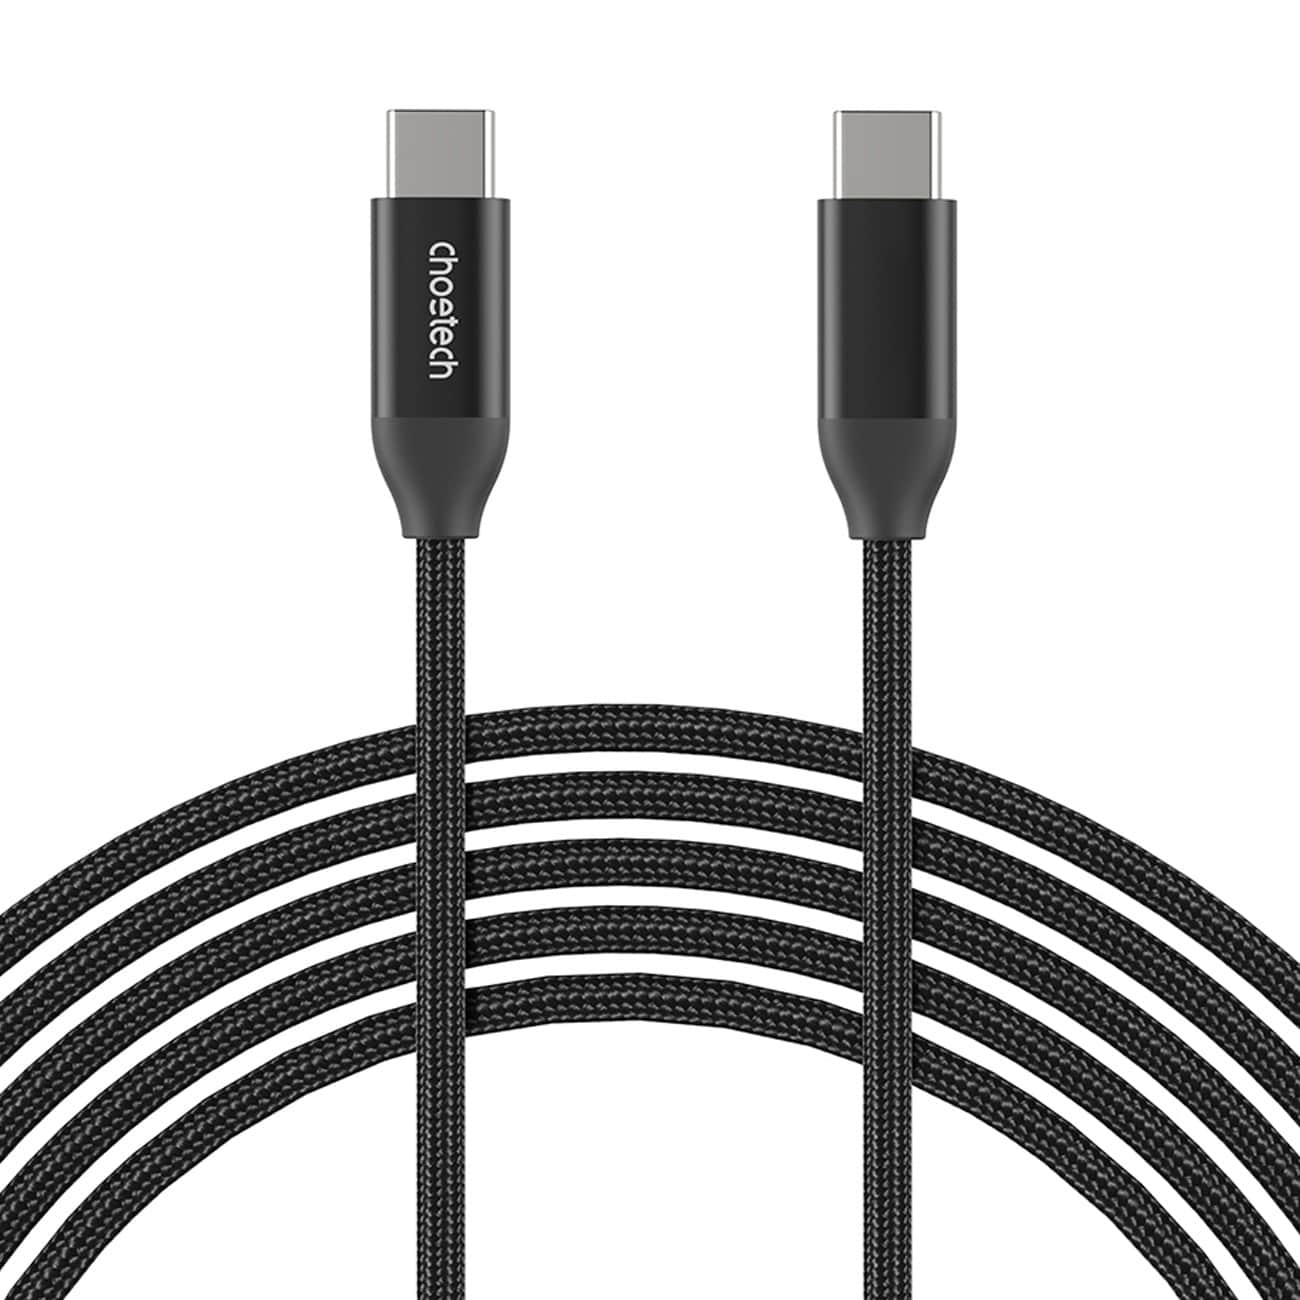 Choetech 240W USB Type C Braided Fast Charging Cable – 2M   |  Smartphone Accessories  |  Cables  |  USB-C to C Cables  |